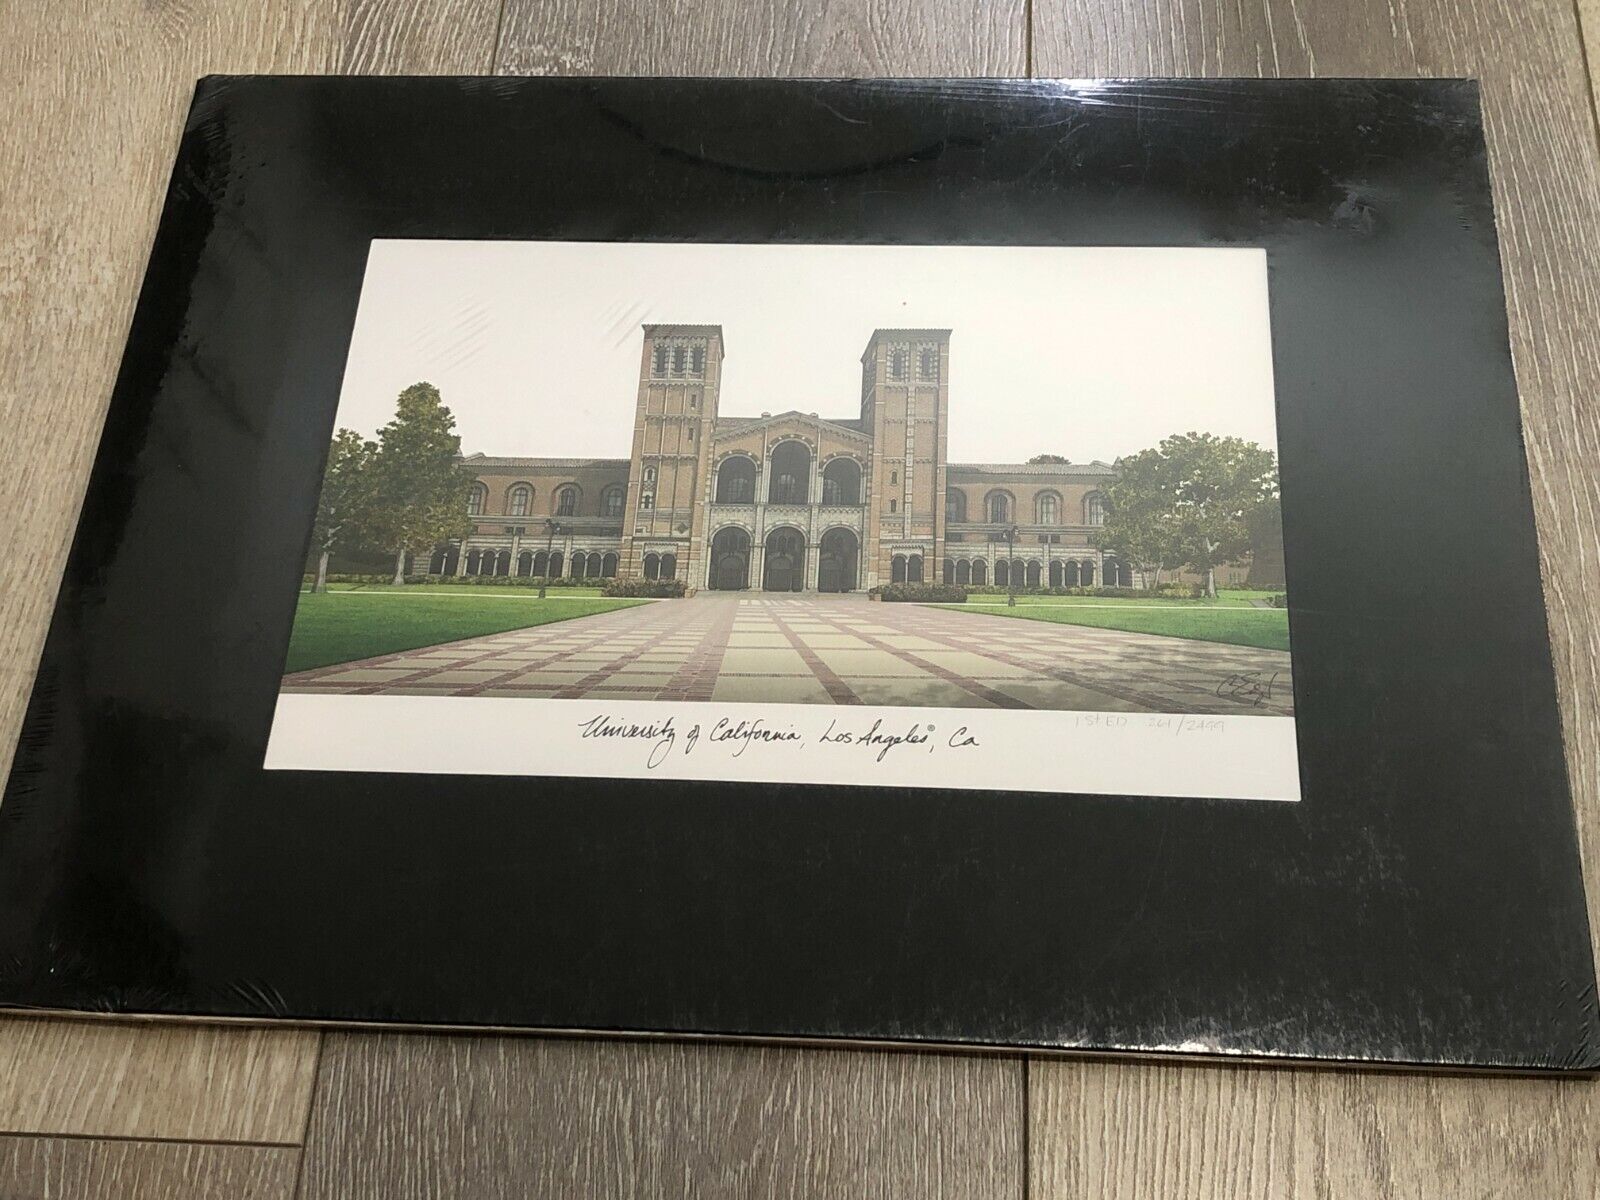 University of California, Los Angeles, CA Campus Images Lithograph Print, 1st Ed